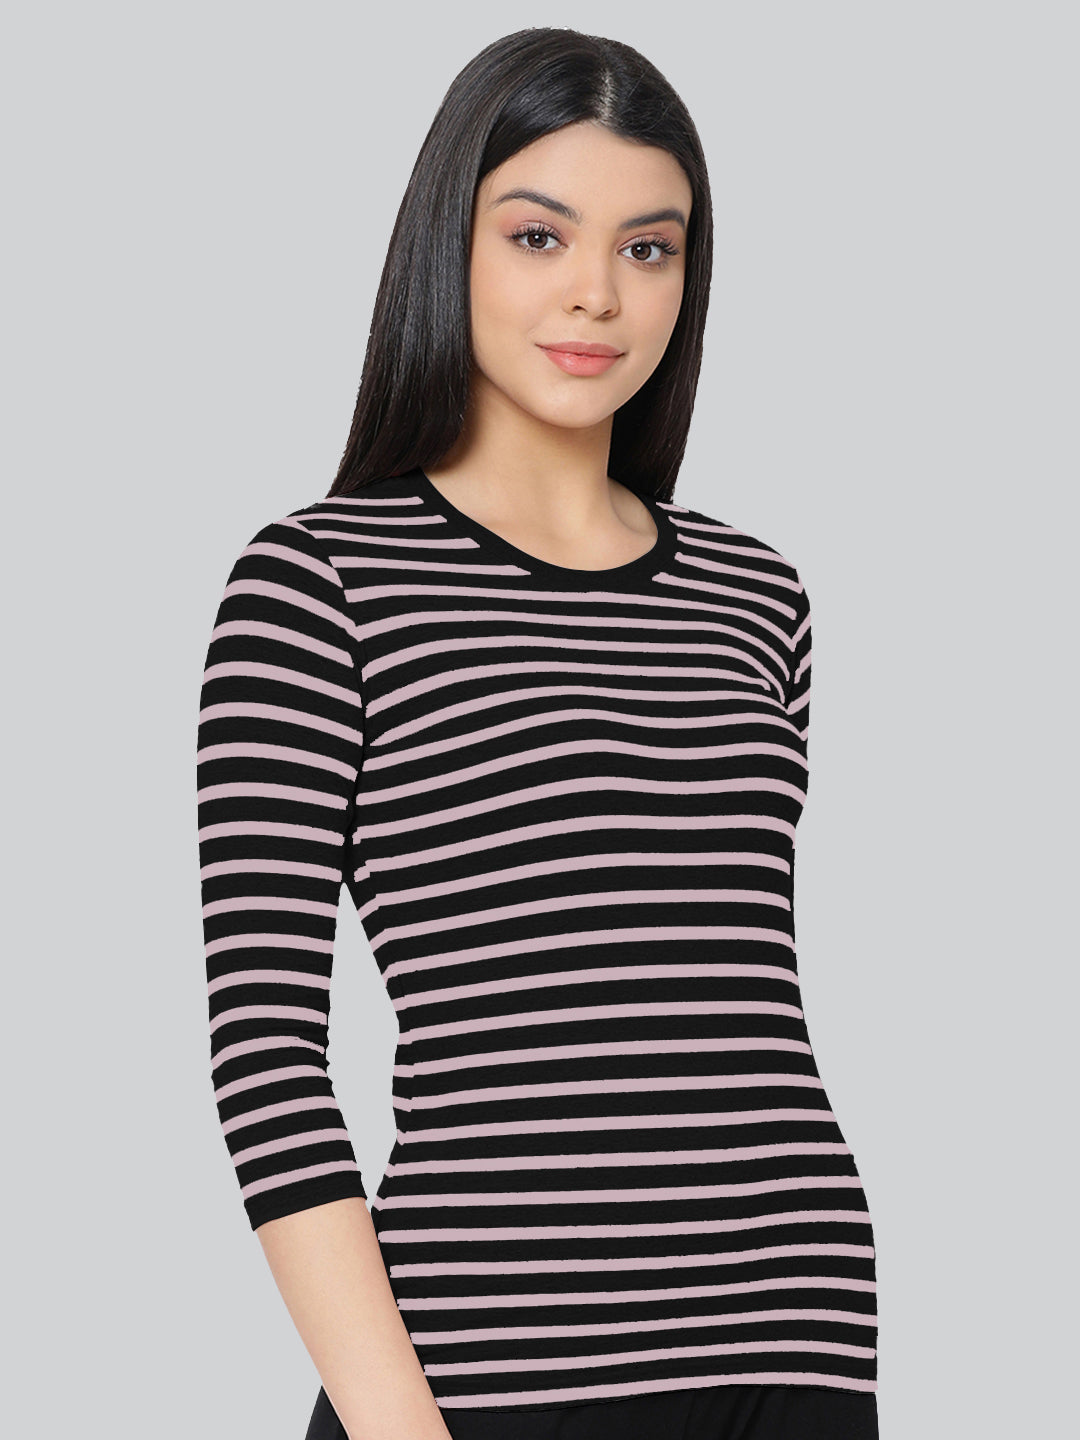 Black Base with Pink Stripes Round Neck 3/4 Sleeve T-Shirt #408